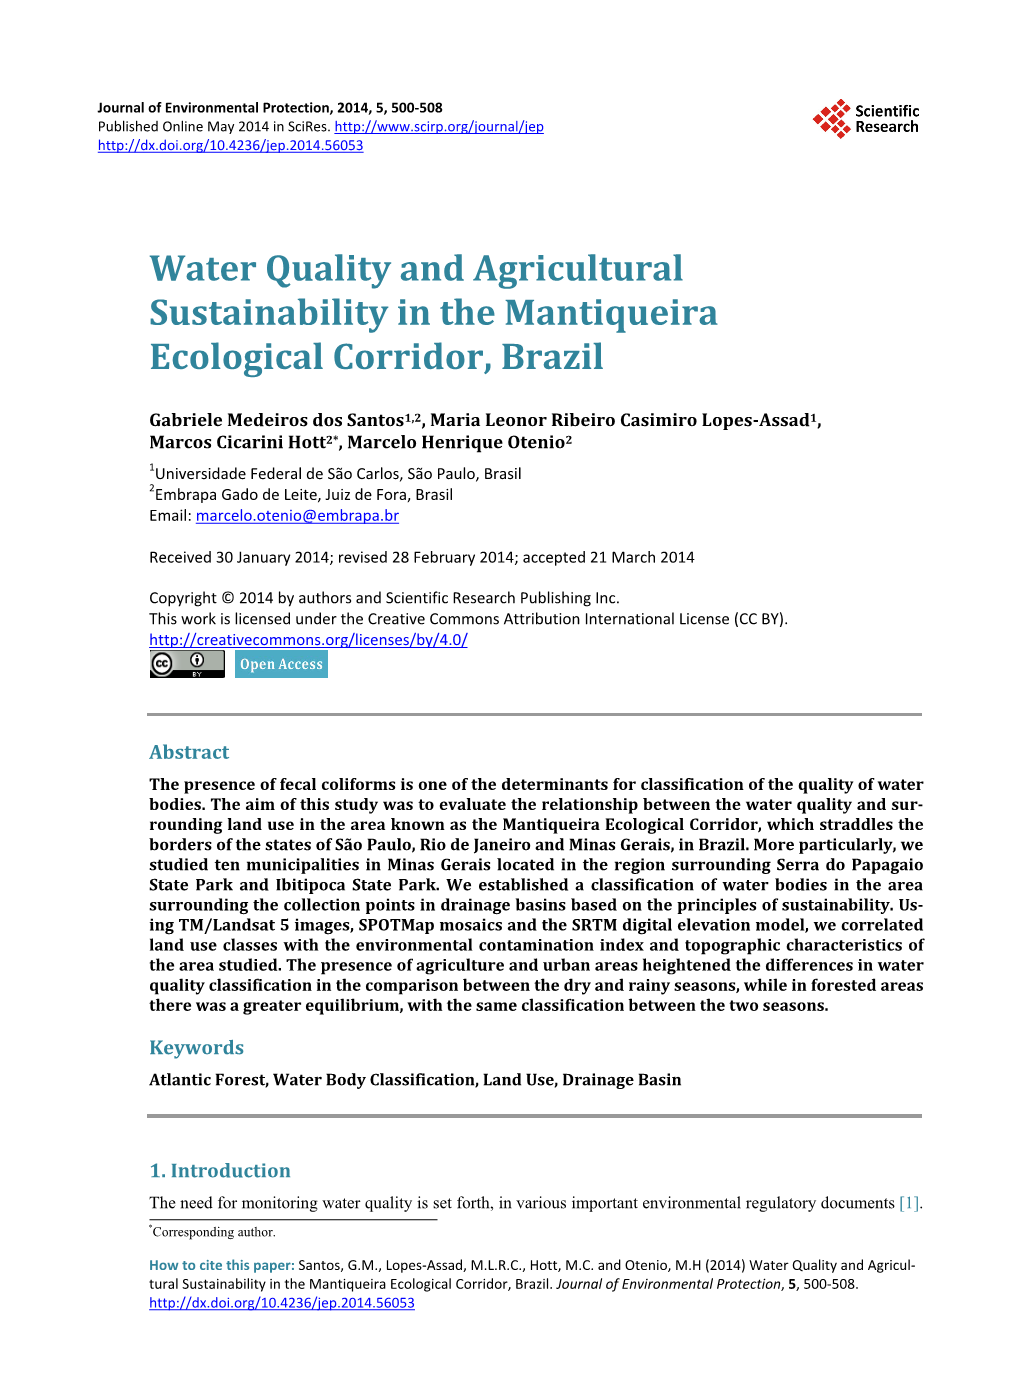 Water Quality and Agricultural Sustainability in the Mantiqueira Ecological Corridor, Brazil